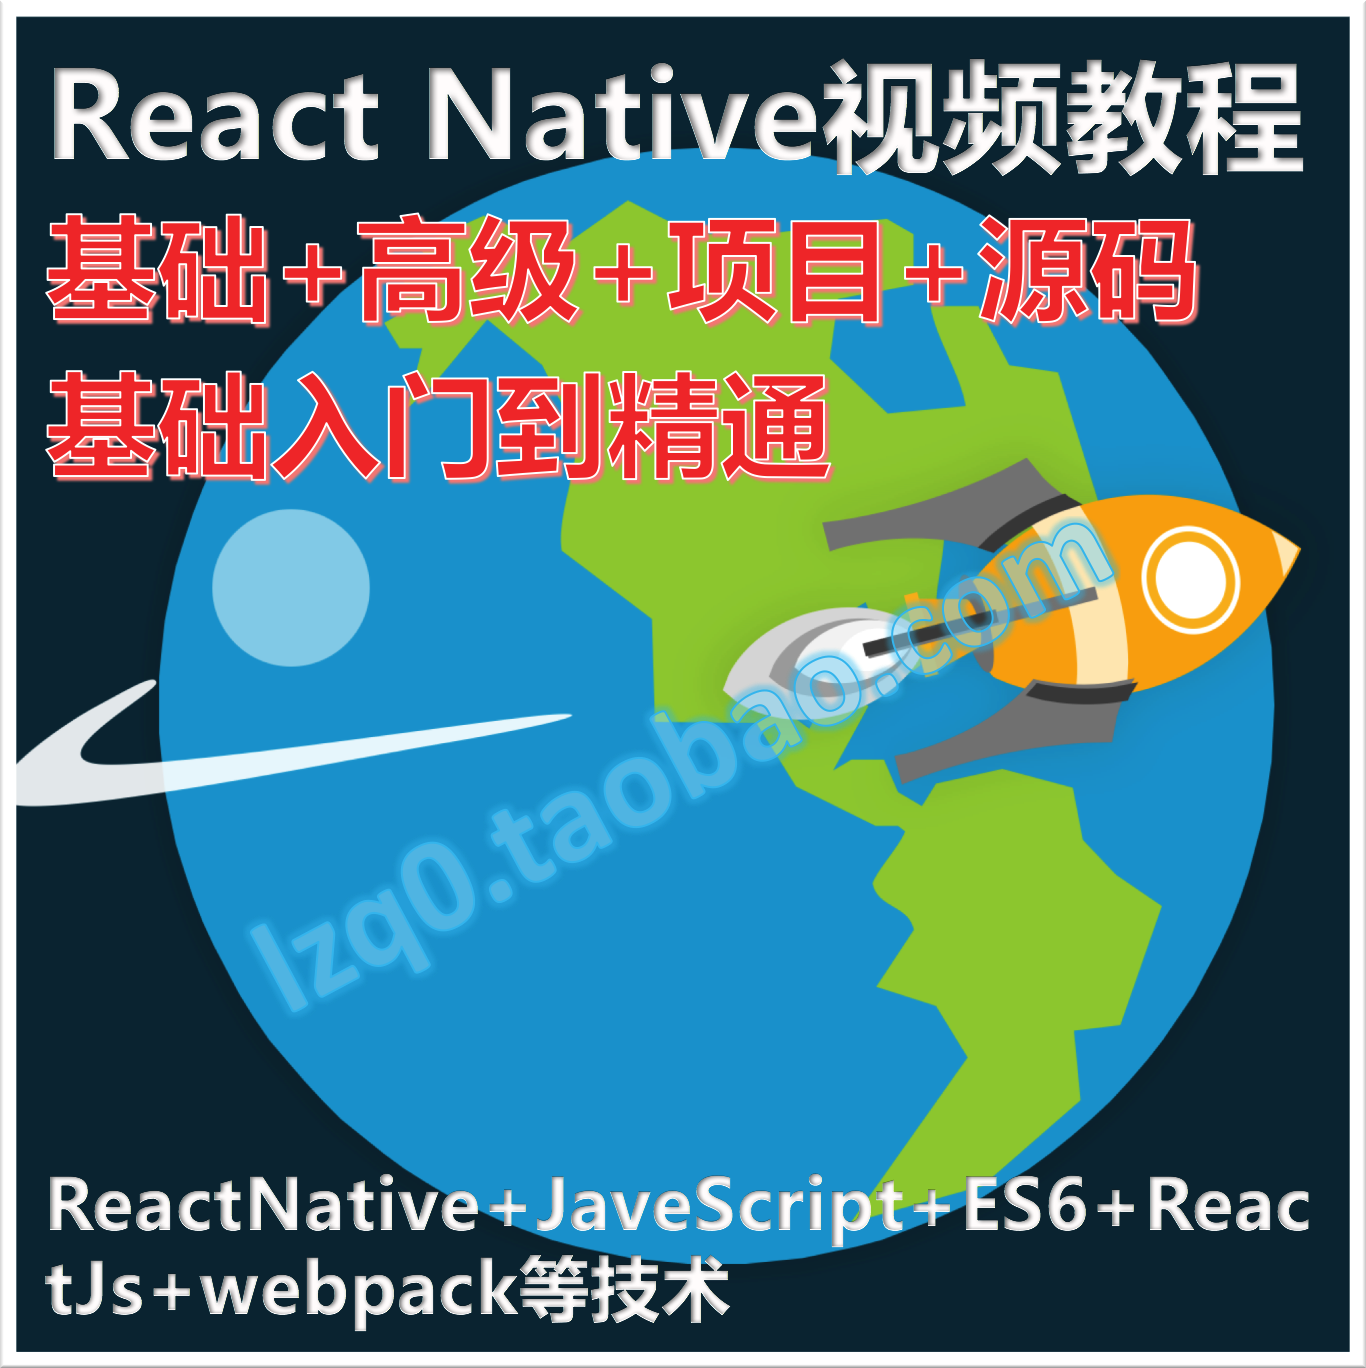 React Native视频教程从入门到精通+项目实战 iOS+Android开发